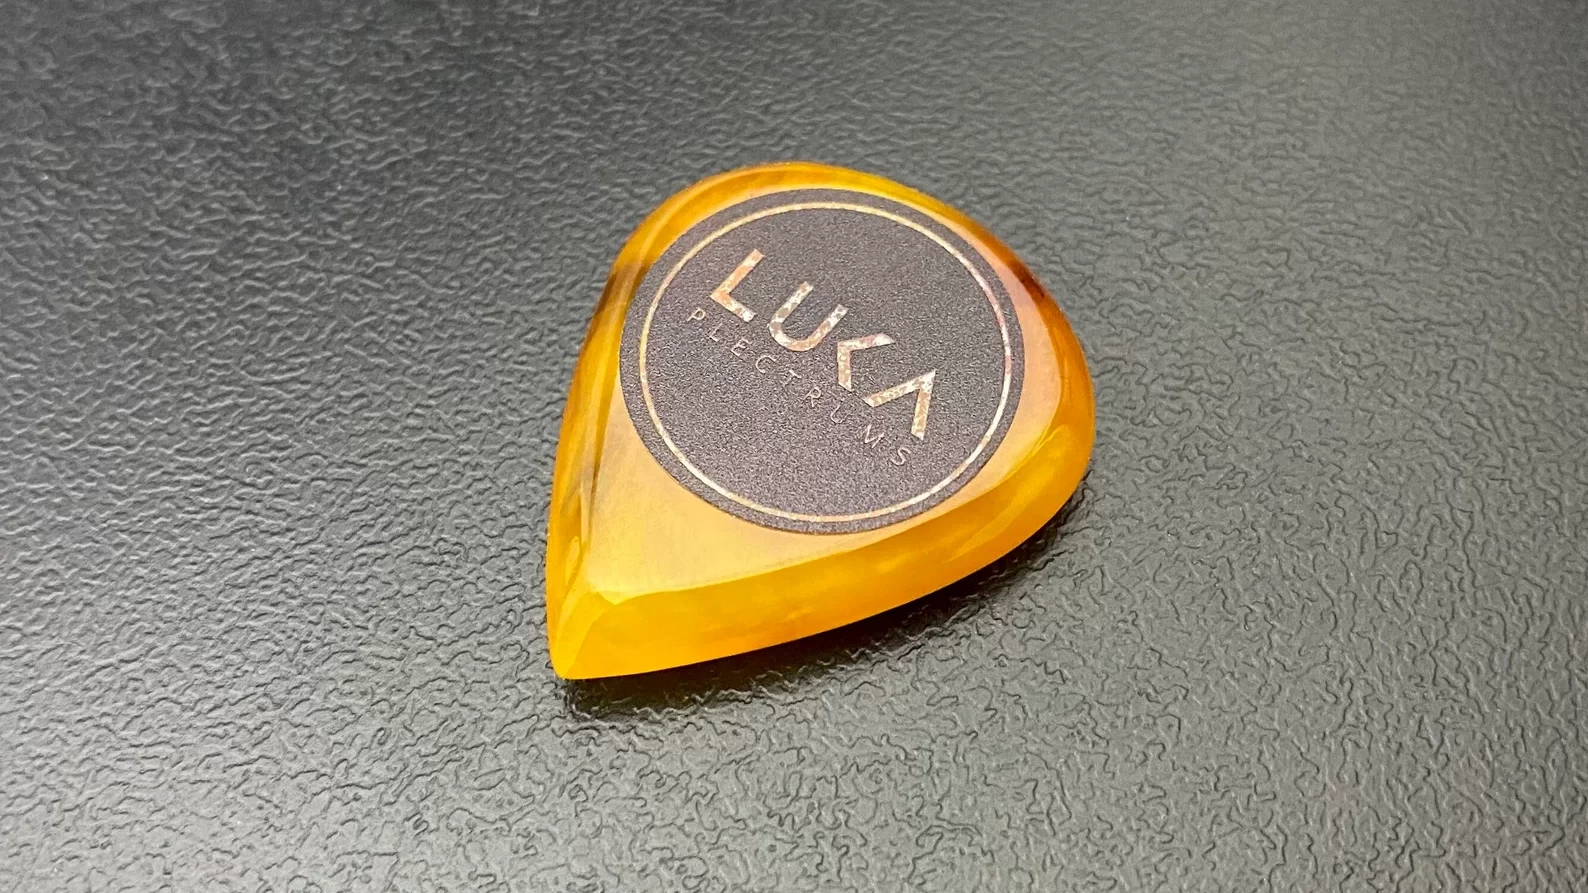 Catalin guitar pick made by Luka Plectrums